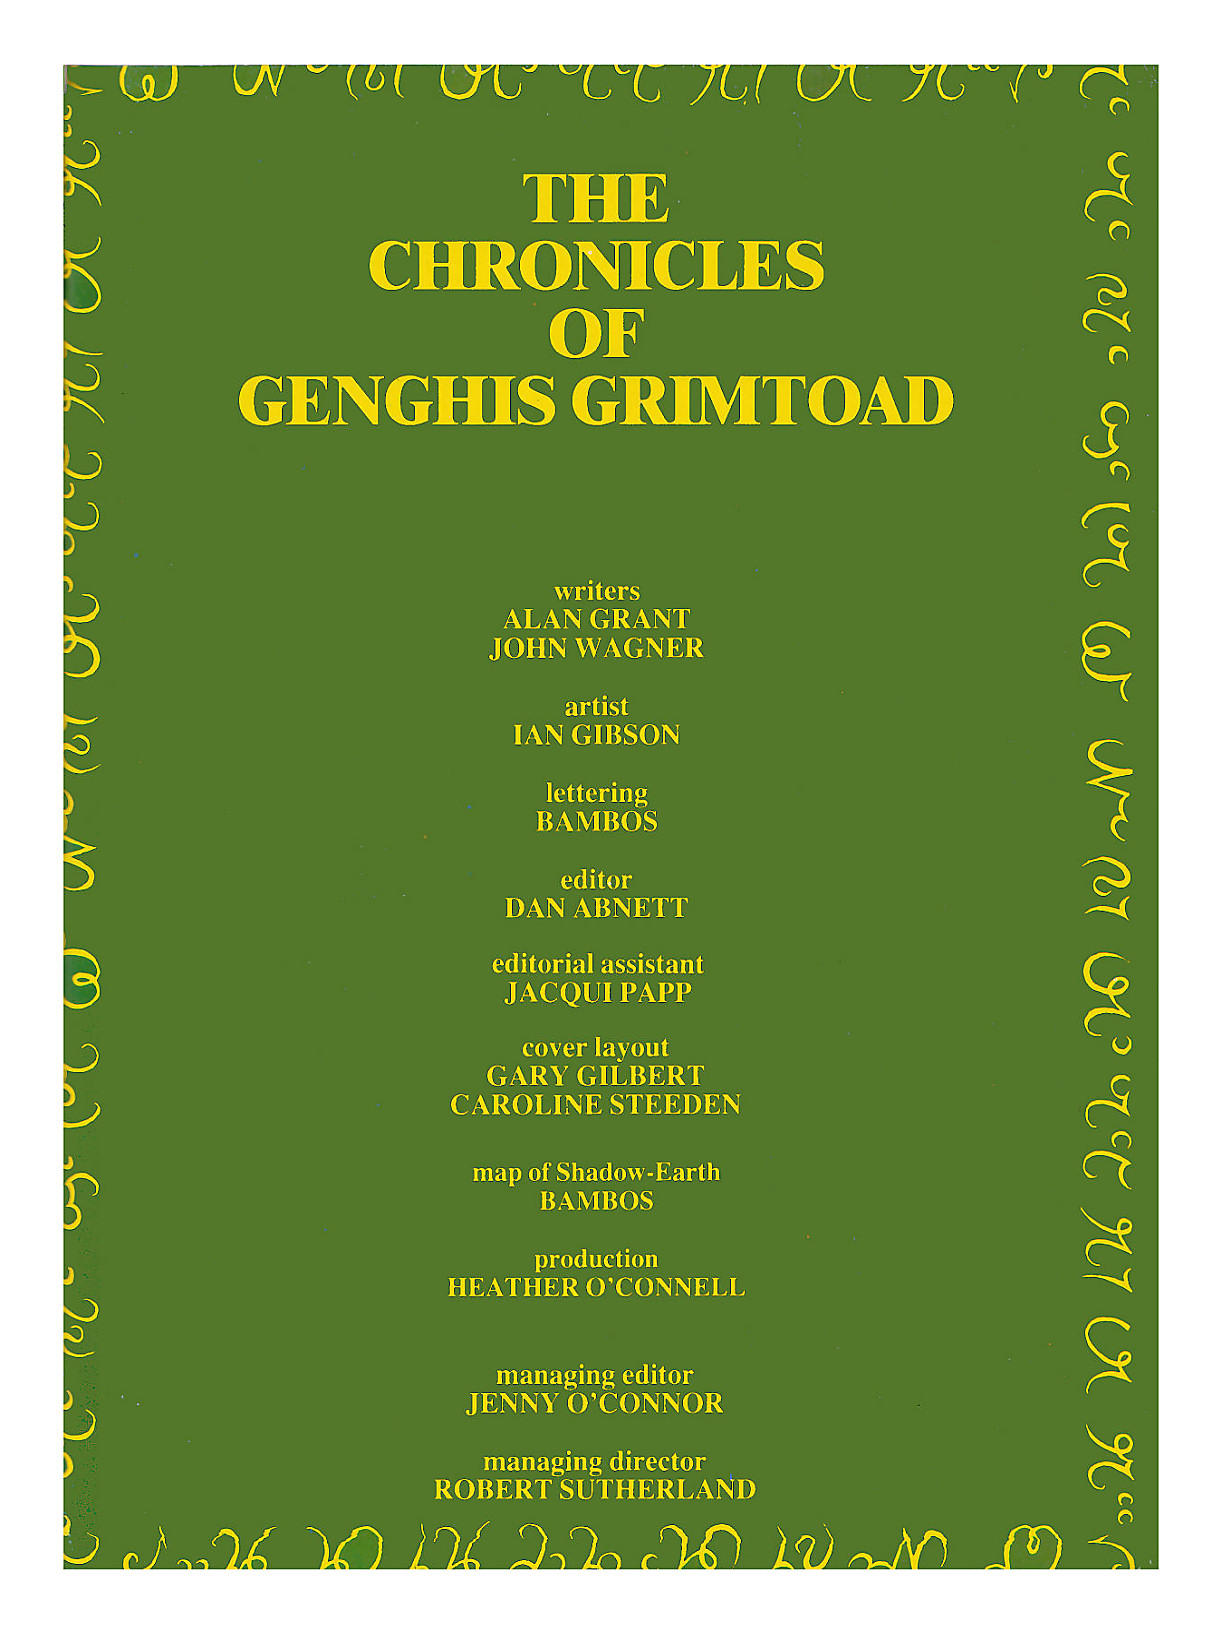 Read online Marvel Graphic Novel comic -  Issue #3 - The Chronicles of Genghis Grimtoad - 3